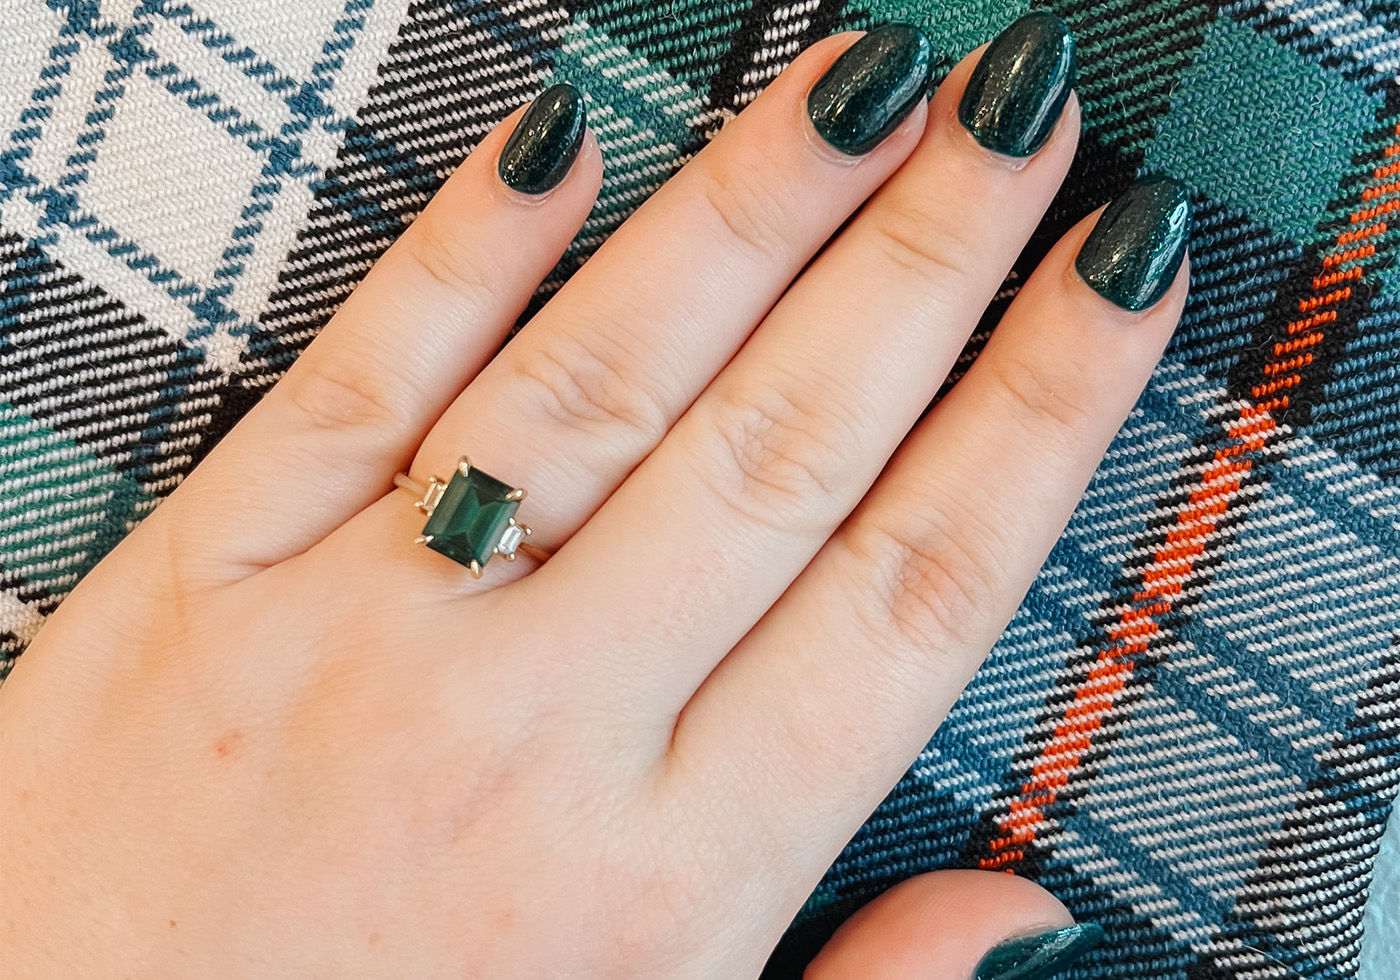 Iceland Nail Polish by DND on top of tartan